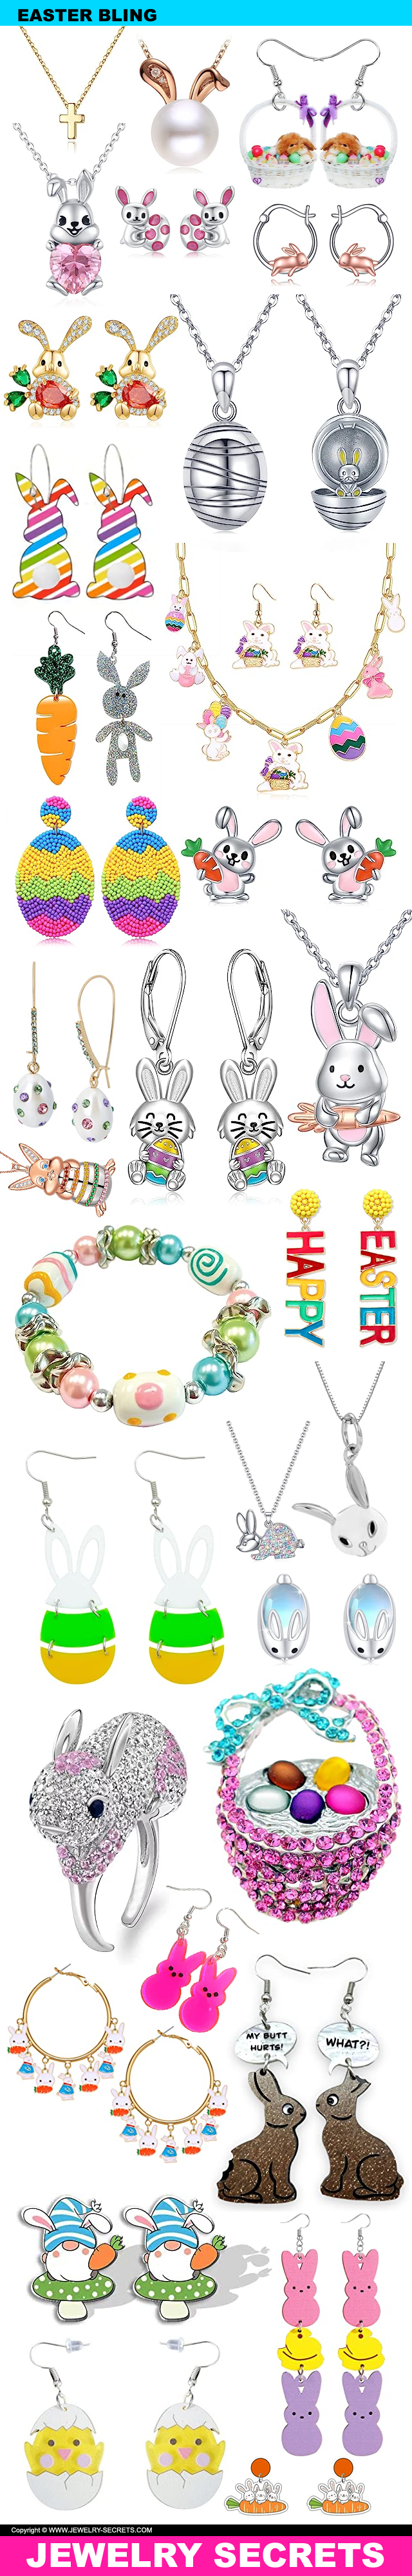 Easter themed jewelry